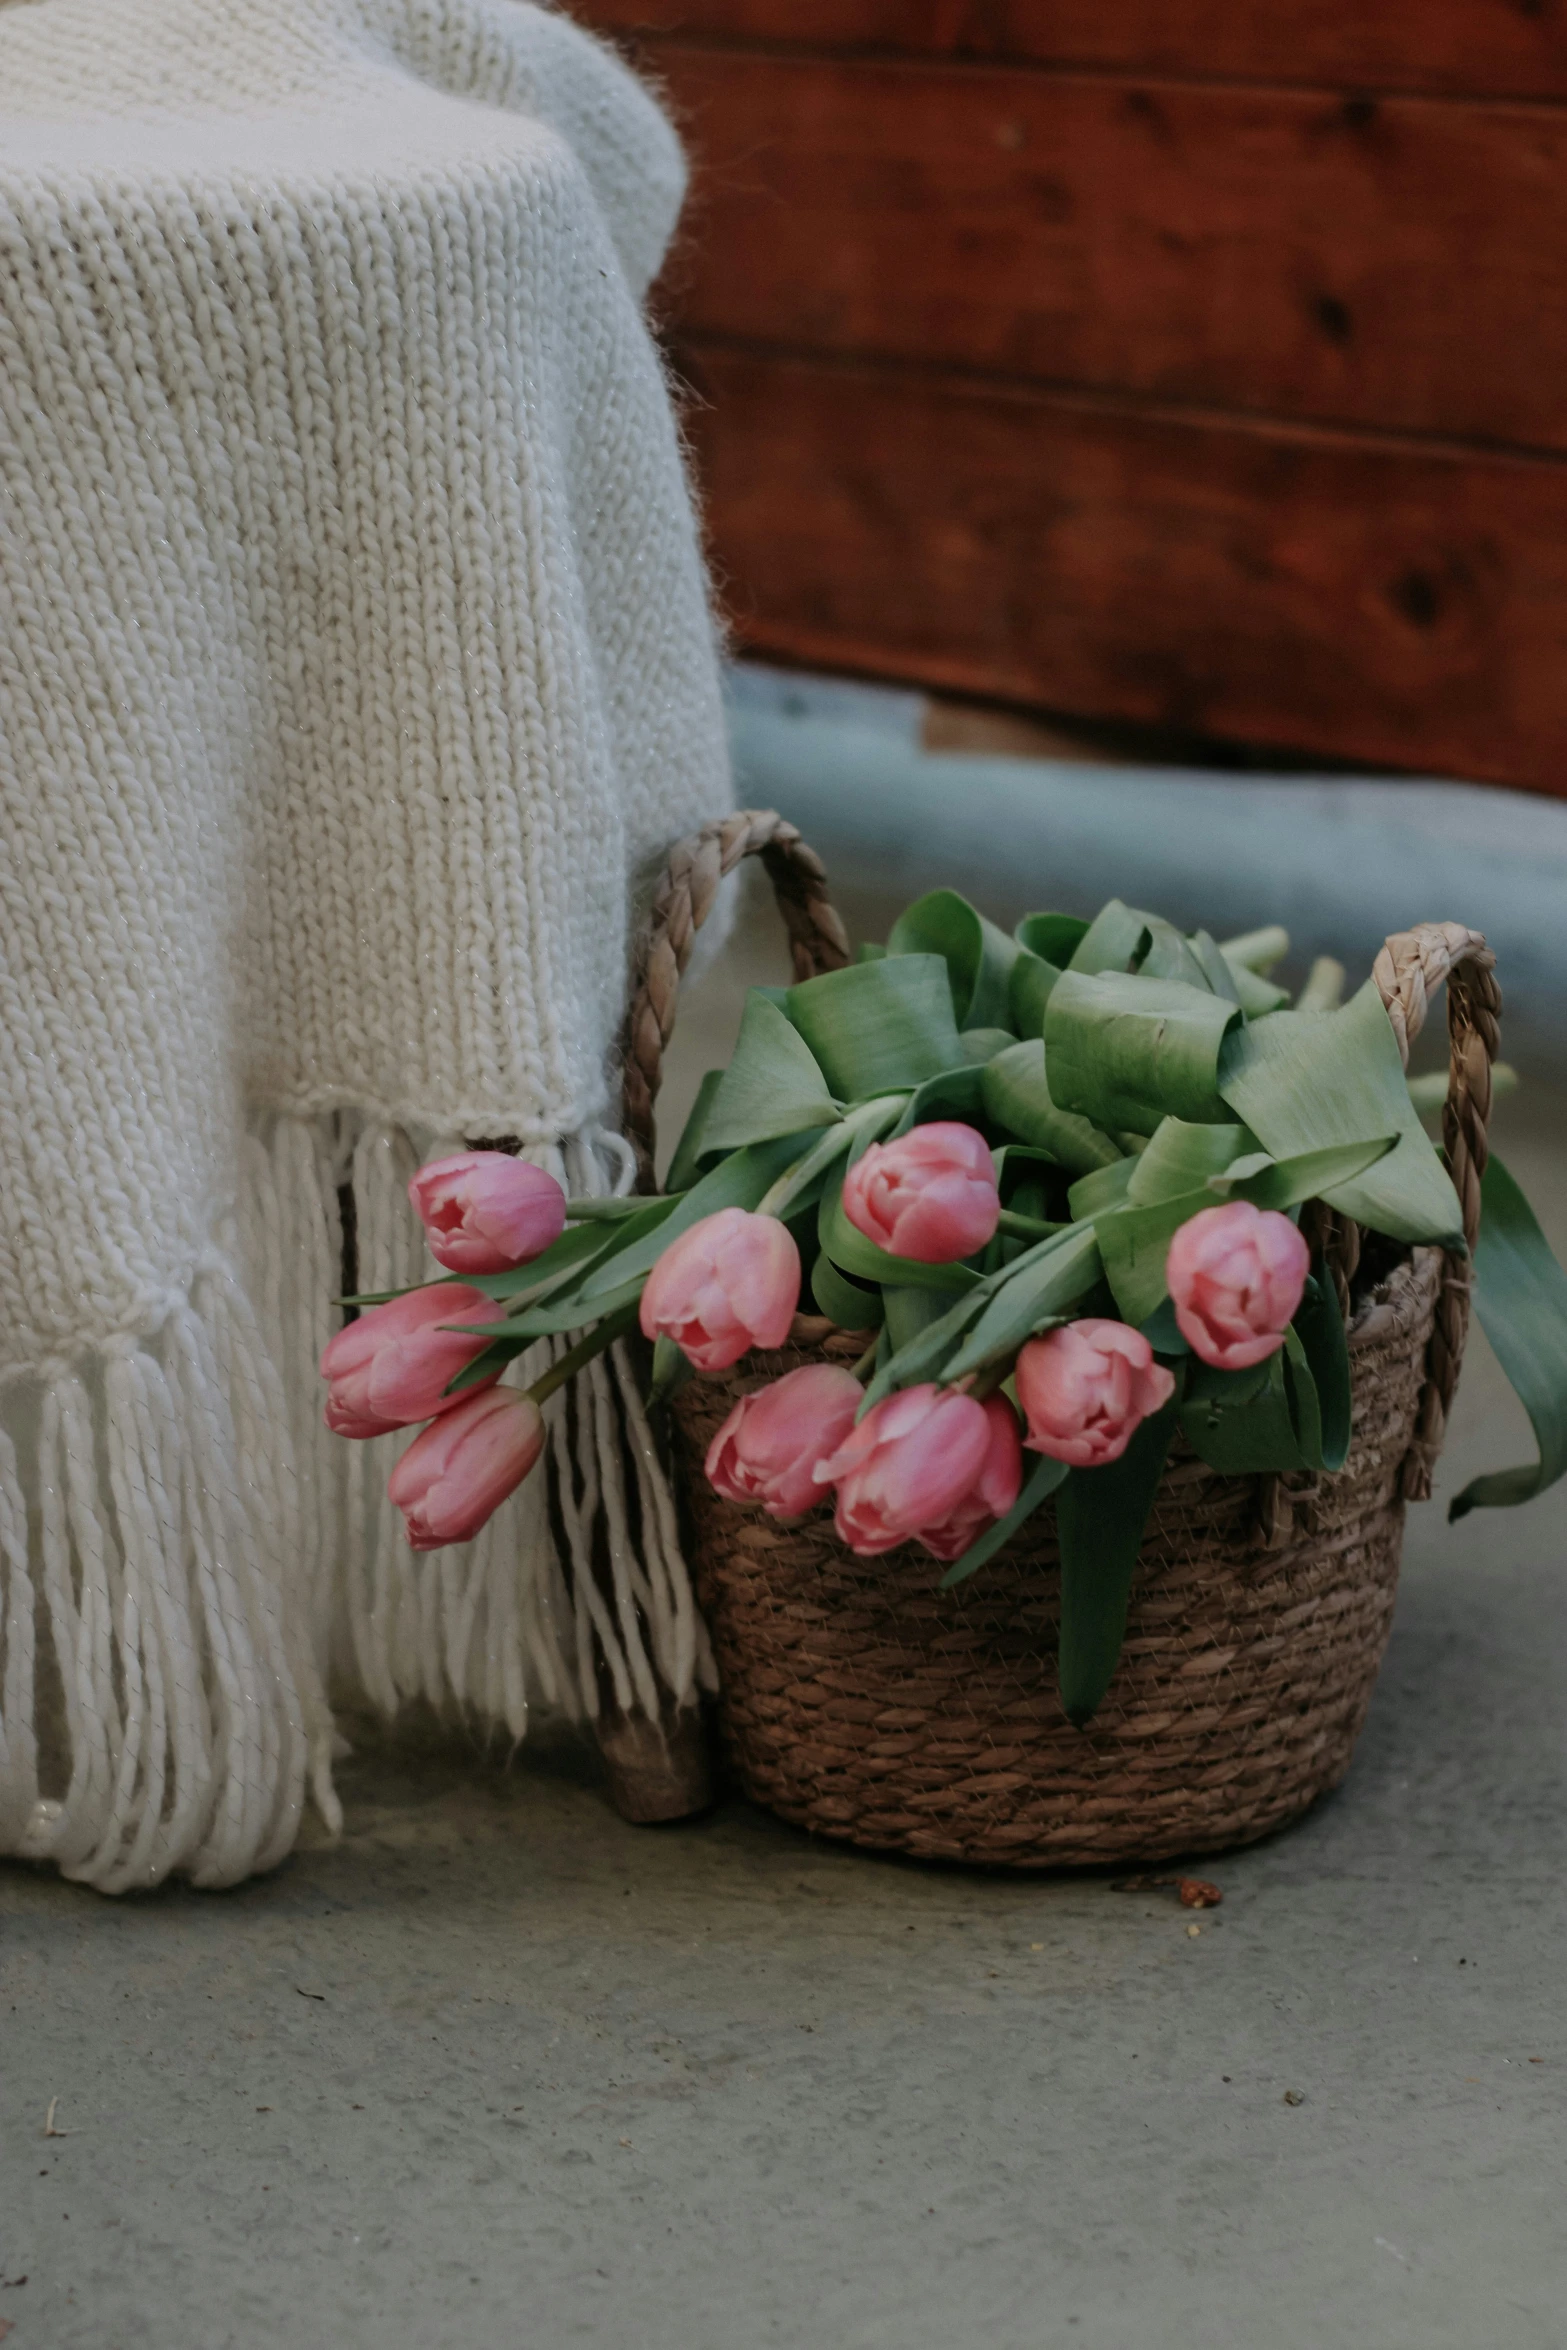 a basket with pink flowers on the ground